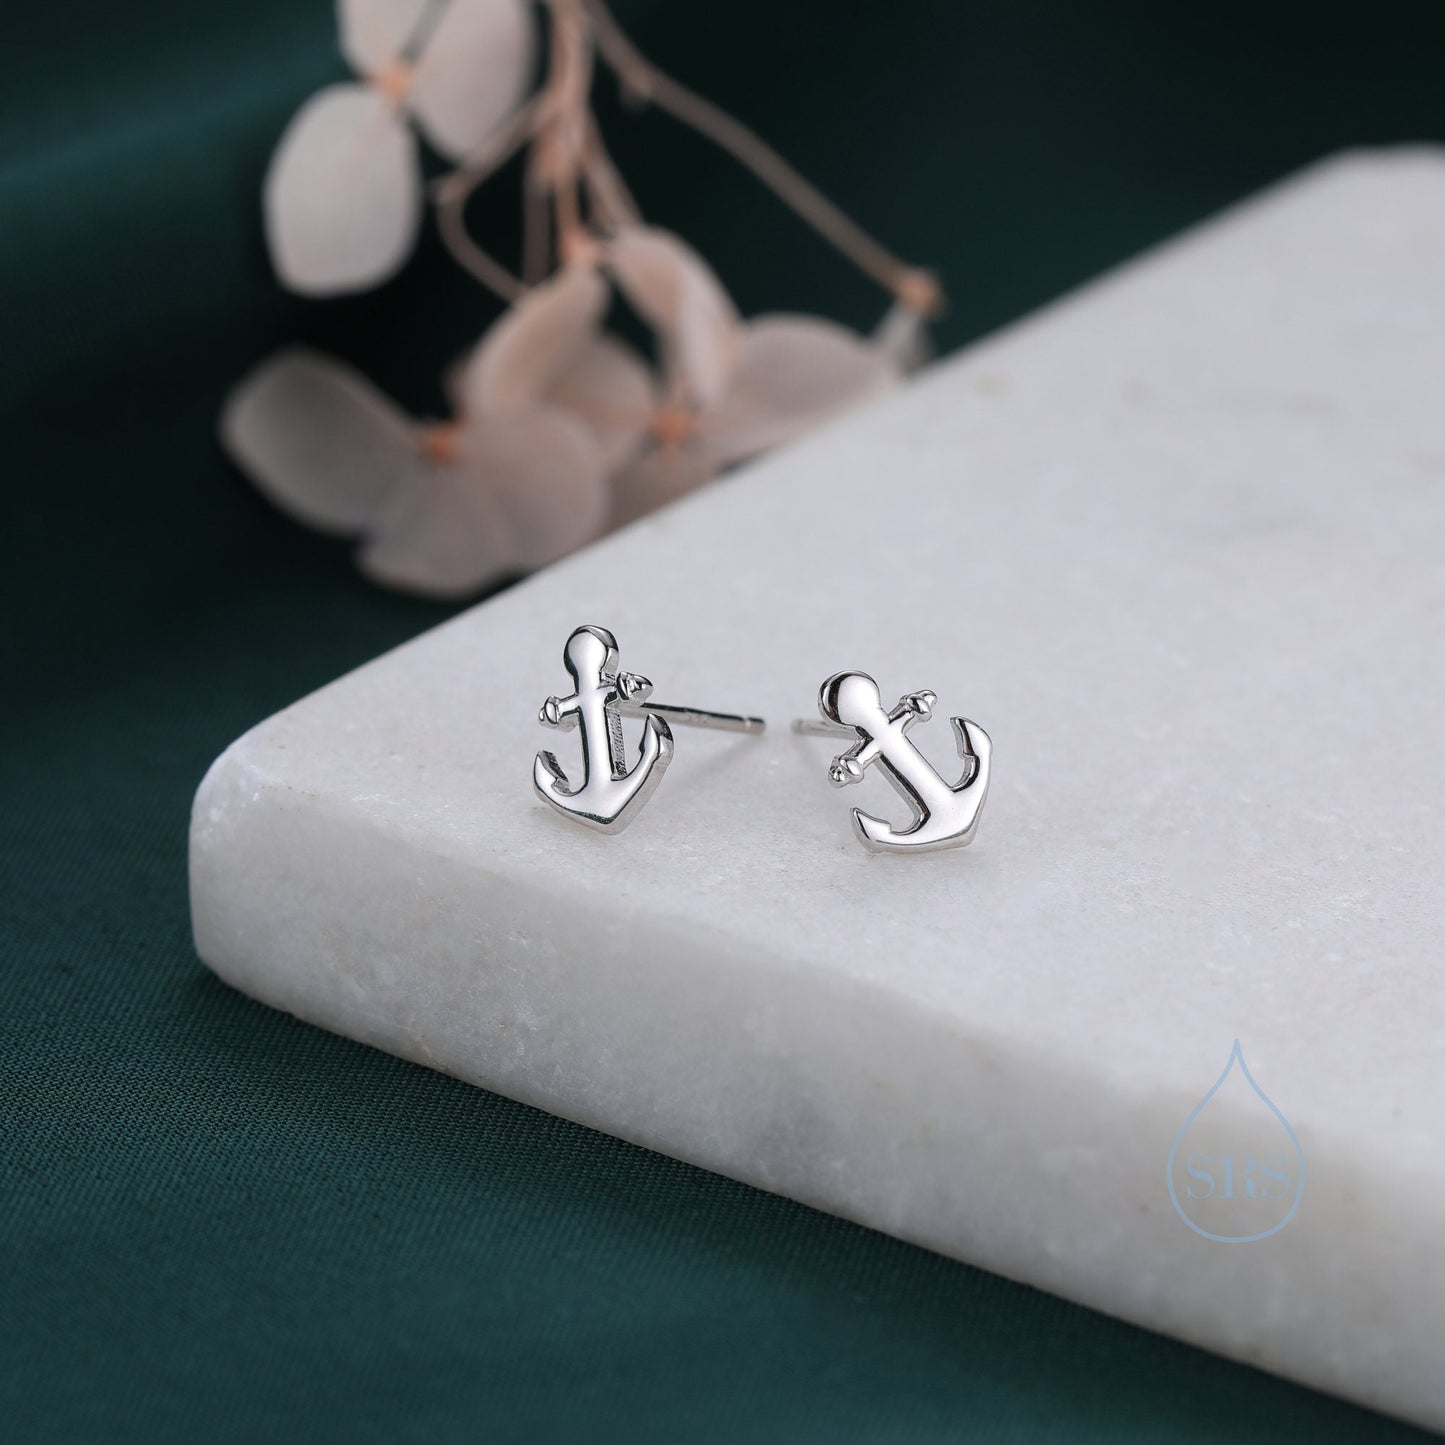 Anchor Stud Earrings in Sterling Silver, Silver or Gold, Tiny Anchor Earrings, Nautical Ocean Theme Earrings